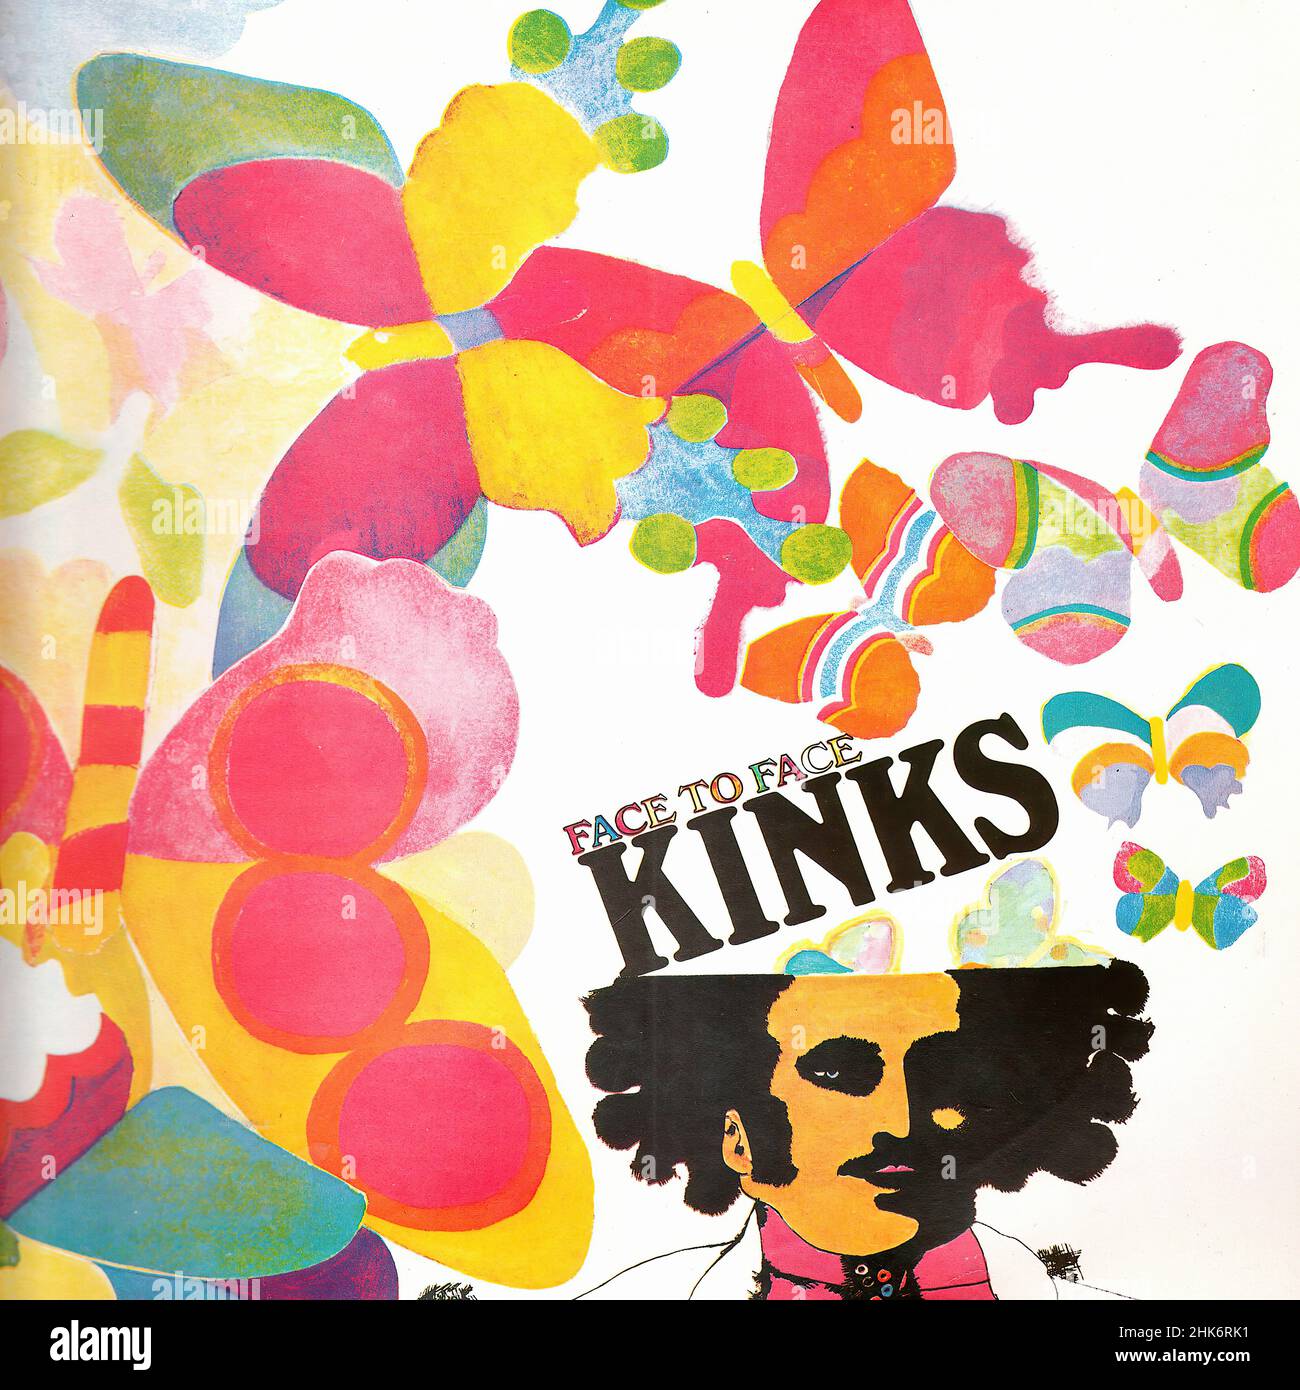 Vintage vinyl record cover -  Kinks, The - Face To Face - D - 1966 - ReRelease 1978 Stock Photo